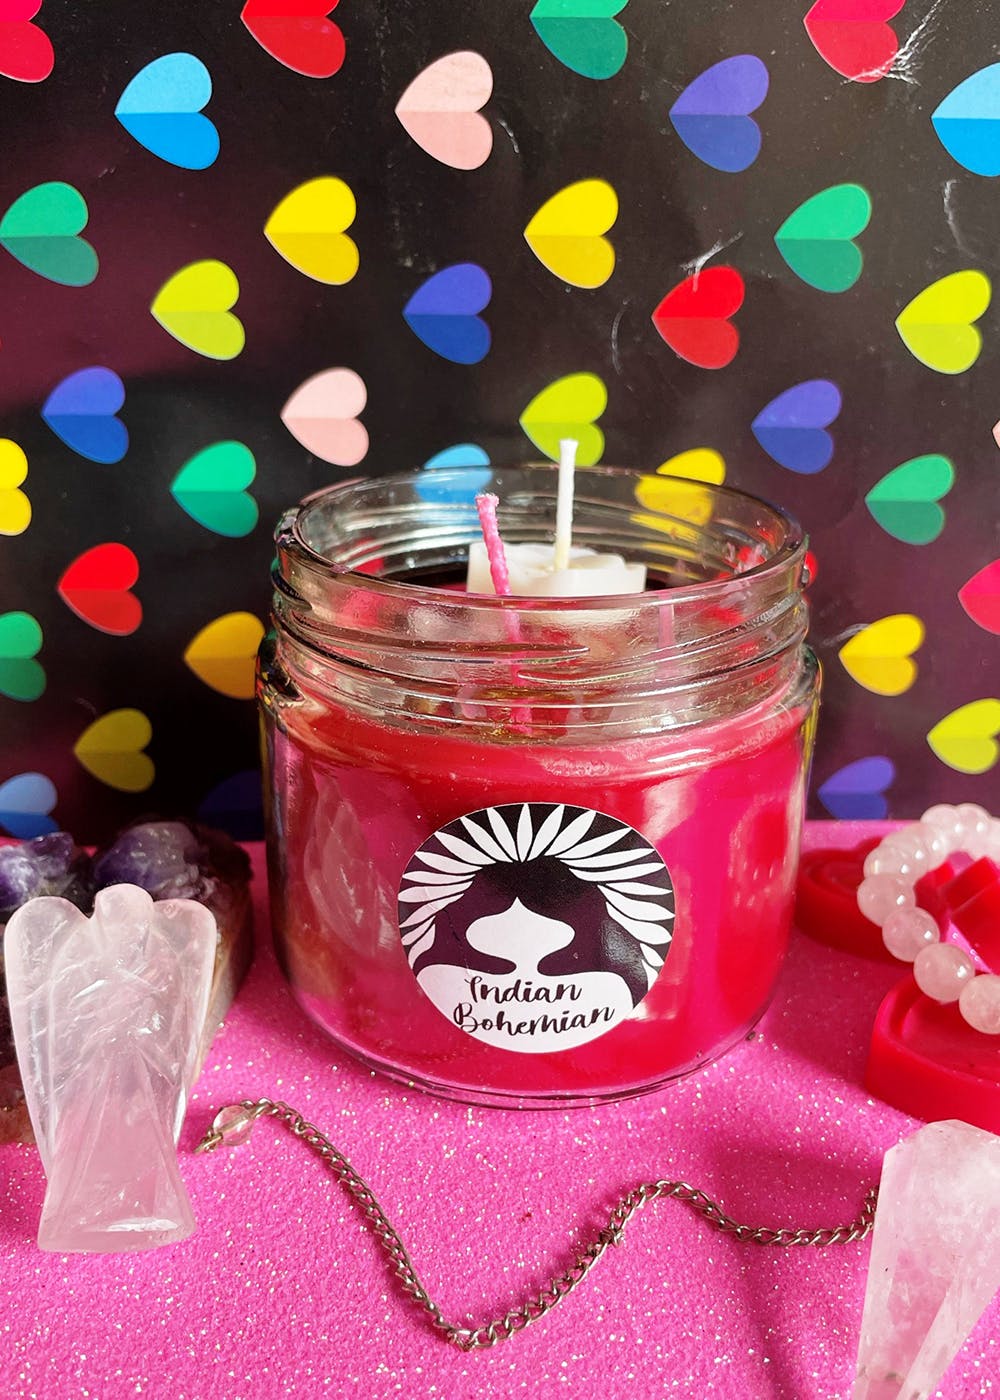 LOVE -  Chakra Healing, Reiki Candle, Intention Candle, Meditation Candle